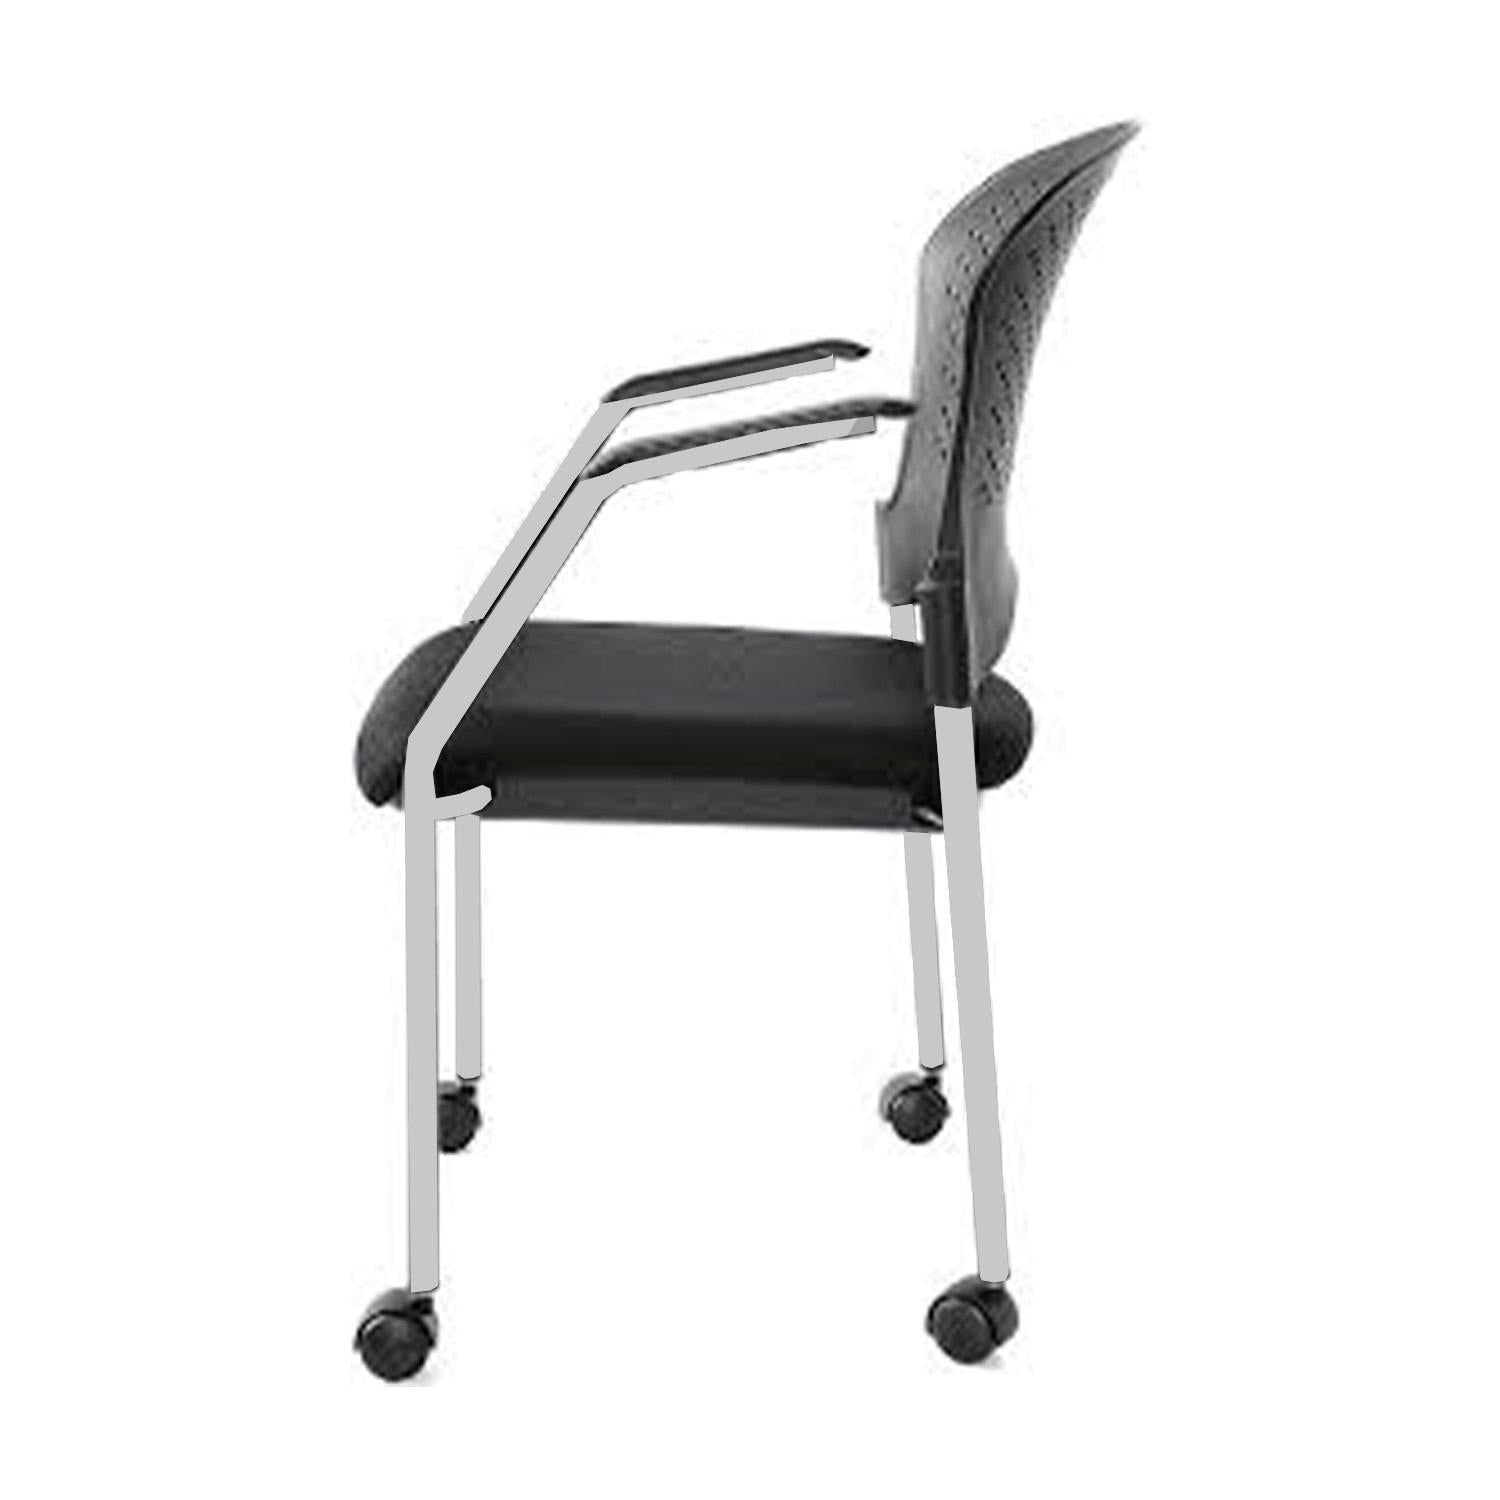 Set of Two Black with Gray Aero Professional Rolling Guest Chairs